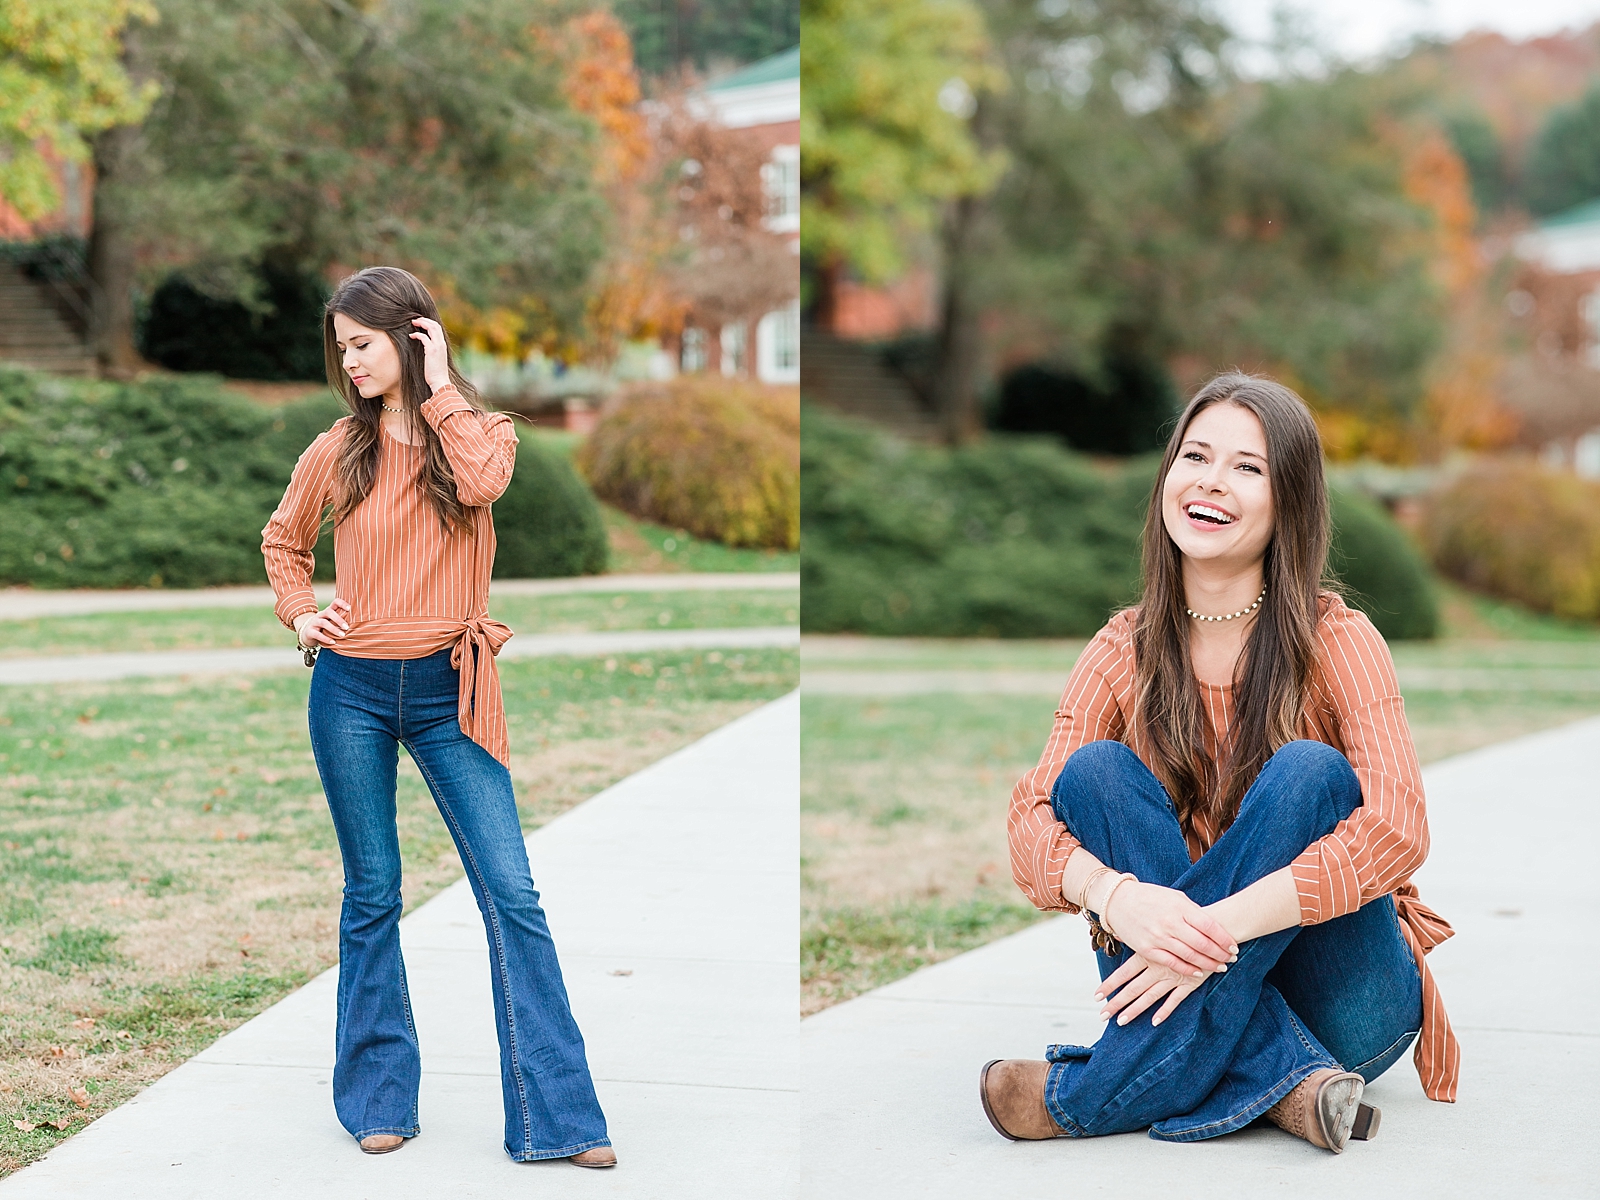 Western Carolina University Senior Sierra looking over her shoulder and sitting on the ground laughing Photos